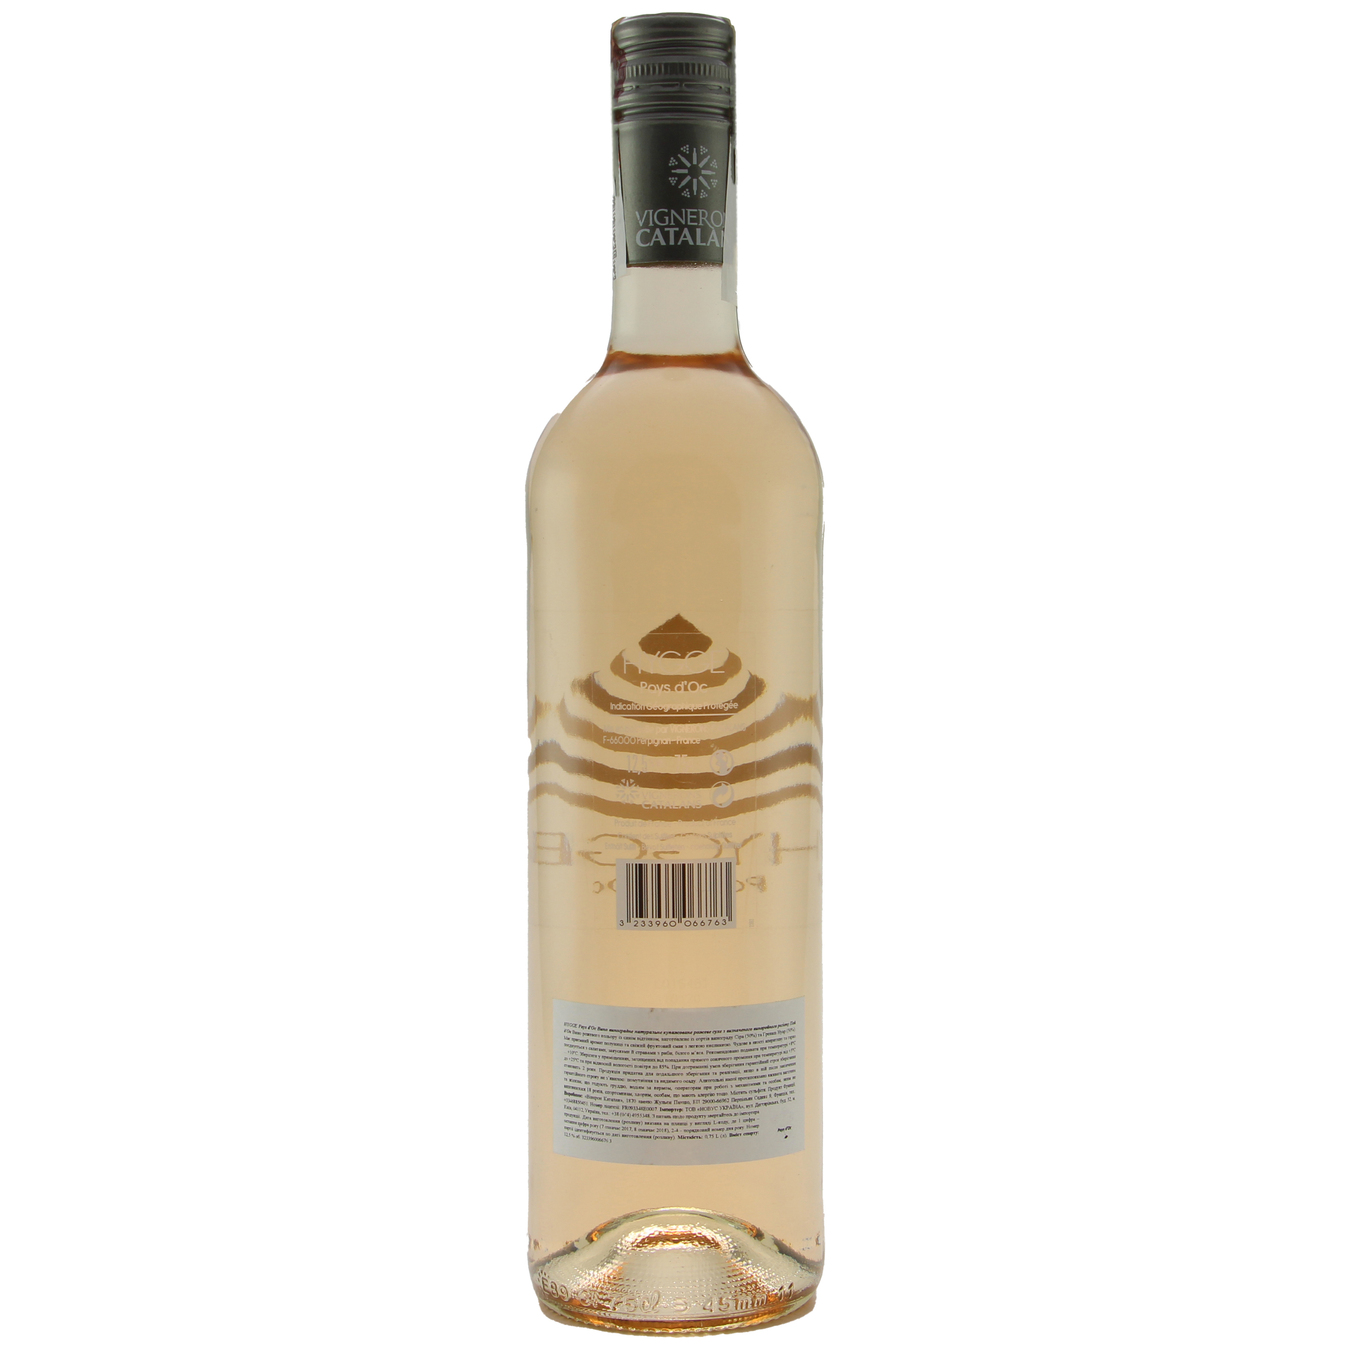 Hygge Pays d'Oc pink dry wine 13,5% 0,75 2